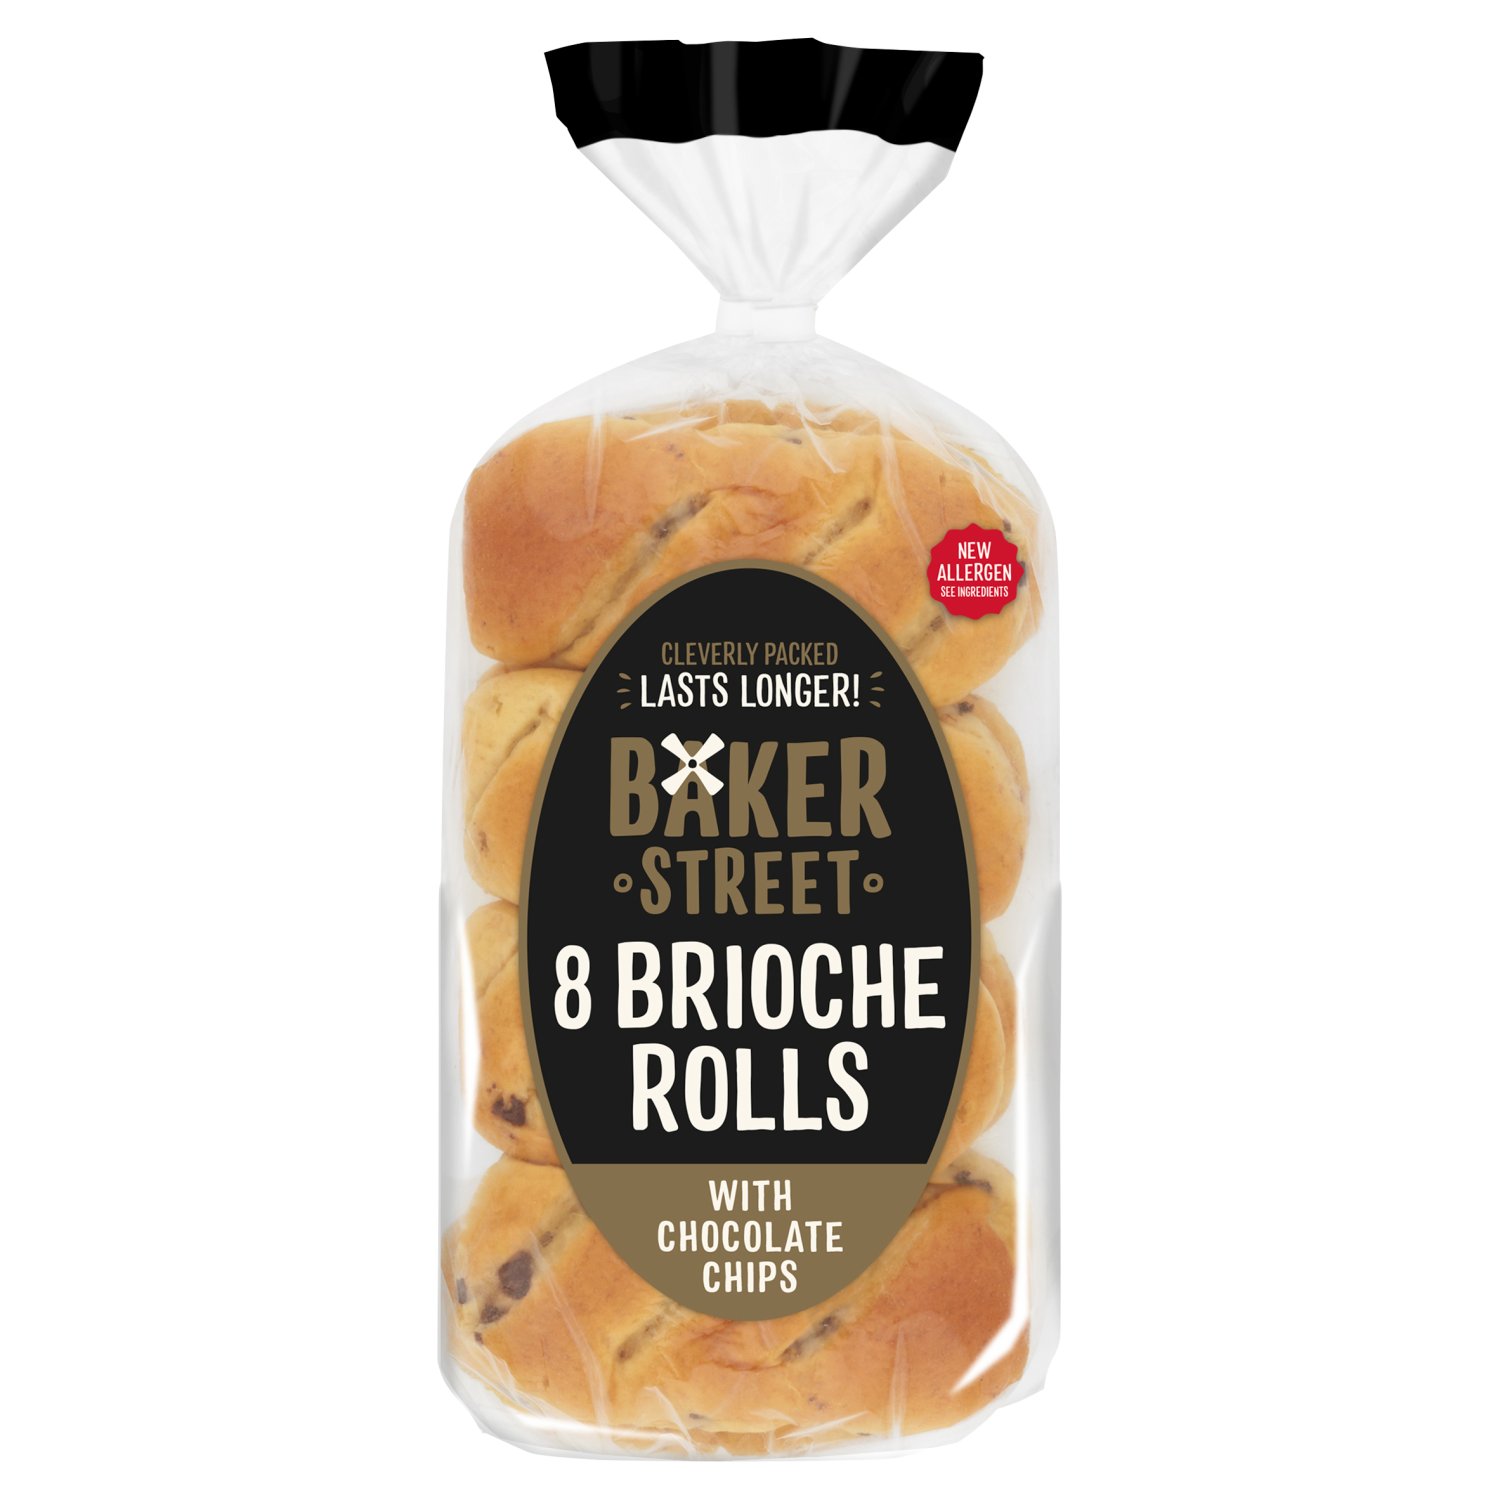 Lovingly baked and cleverly packed, so we can all enjoy it for longer.
Our tasty brioche stays fresher for longer, so it's always there for you when you need it. It's simple, we just combine our unique recipes with a clean packaging process, and 'ta-dah!' brioche that lasts longer!